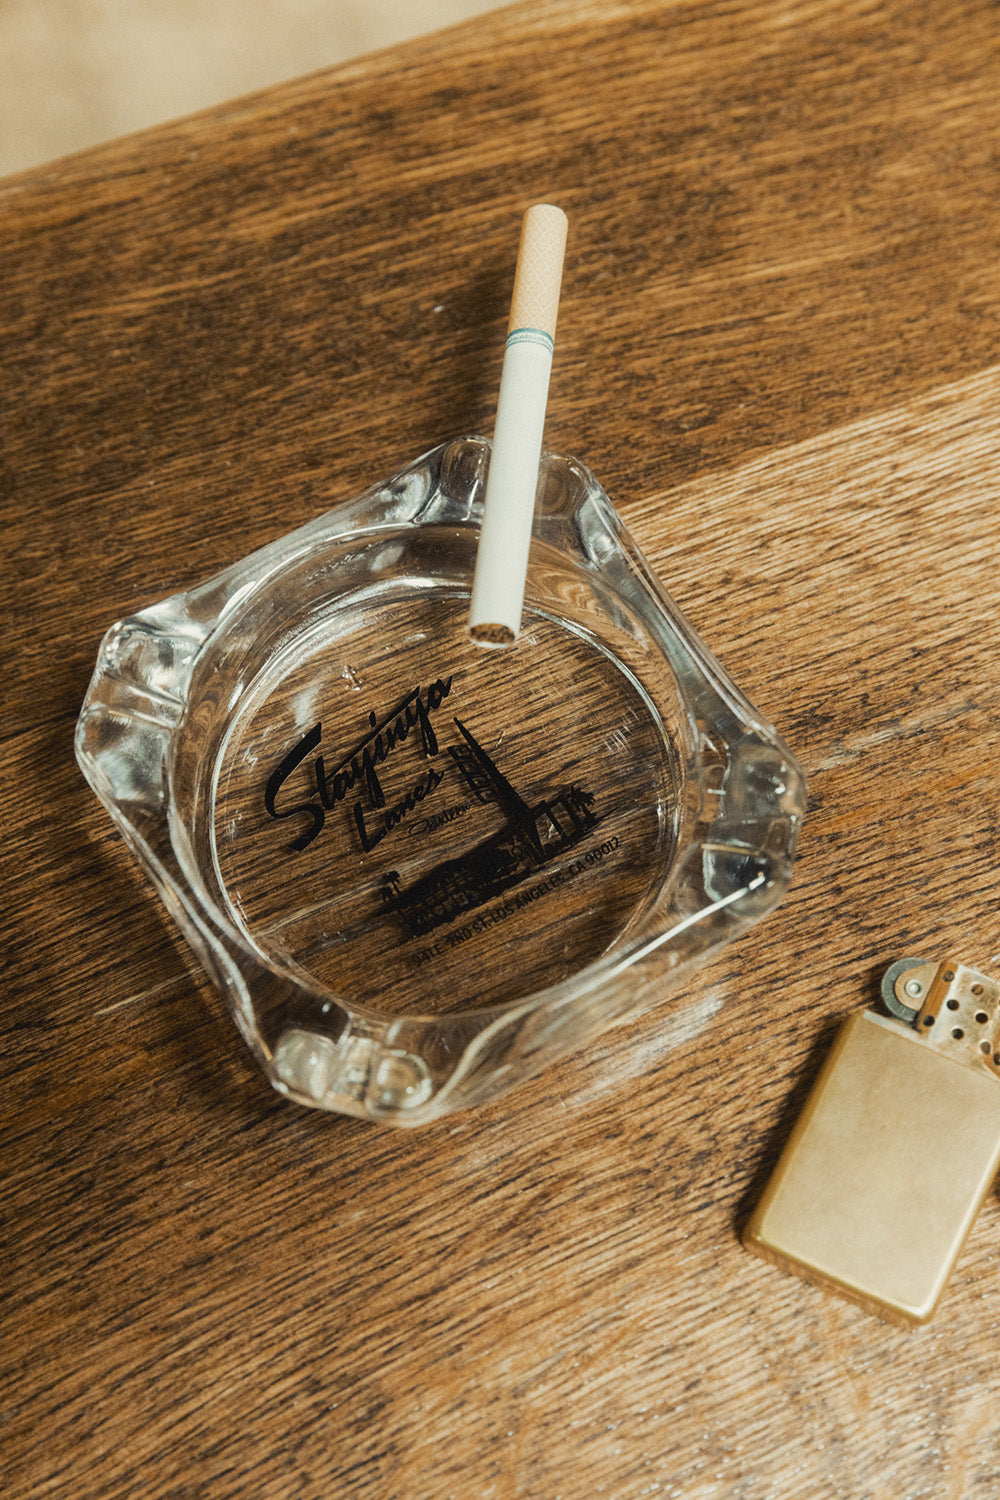 A glass ashtray with a bowling alley printed on it sits on a wooden table.